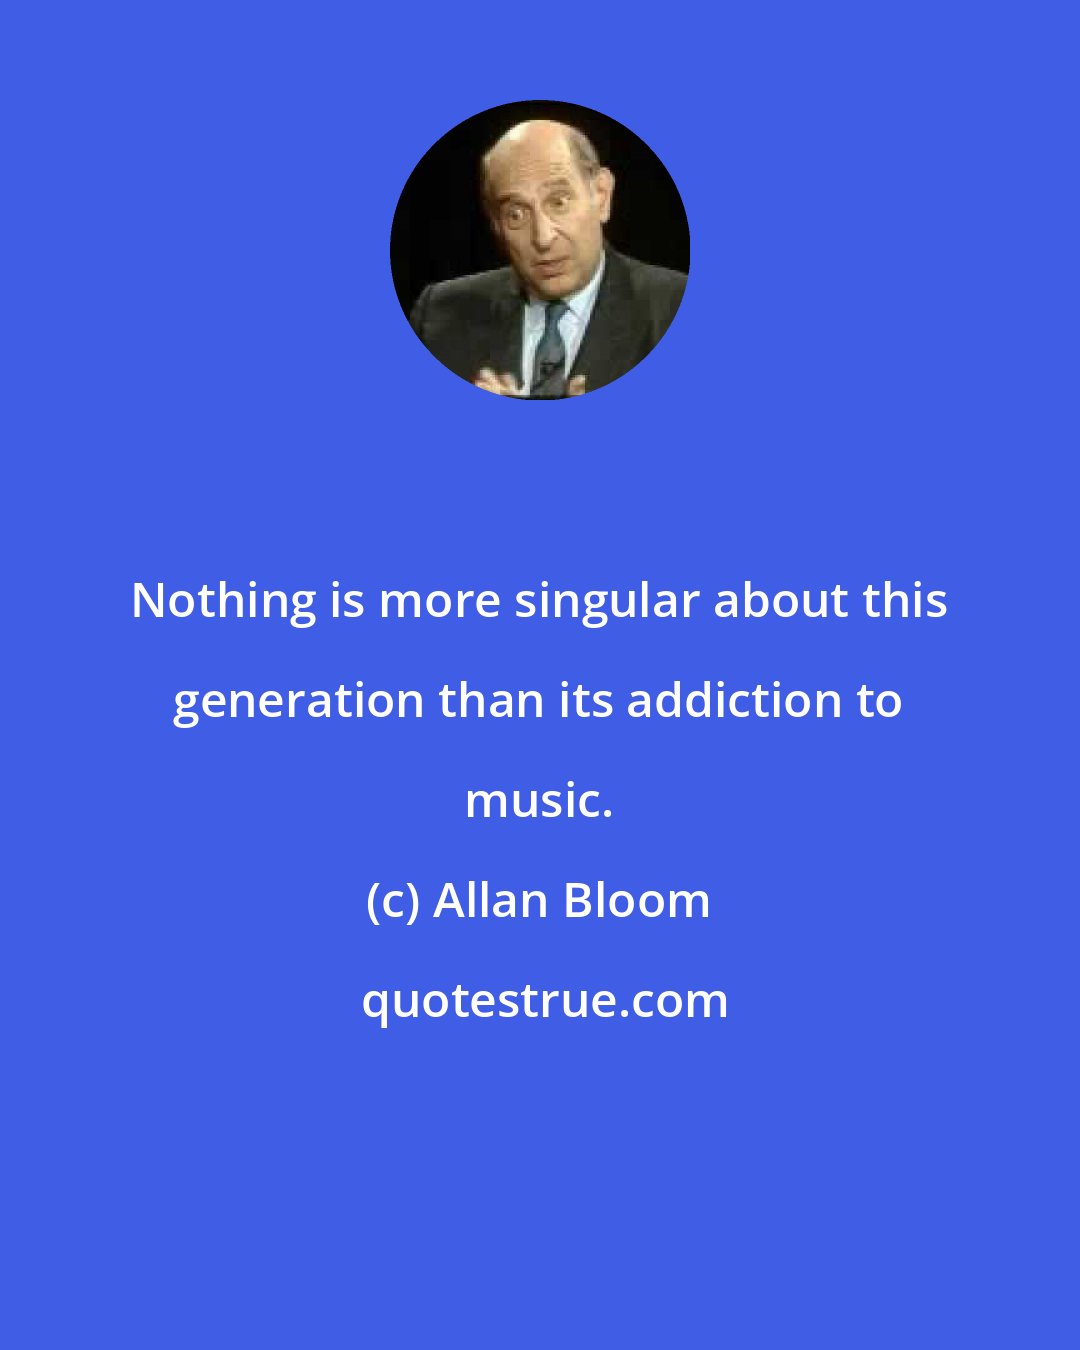 Allan Bloom: Nothing is more singular about this generation than its addiction to music.